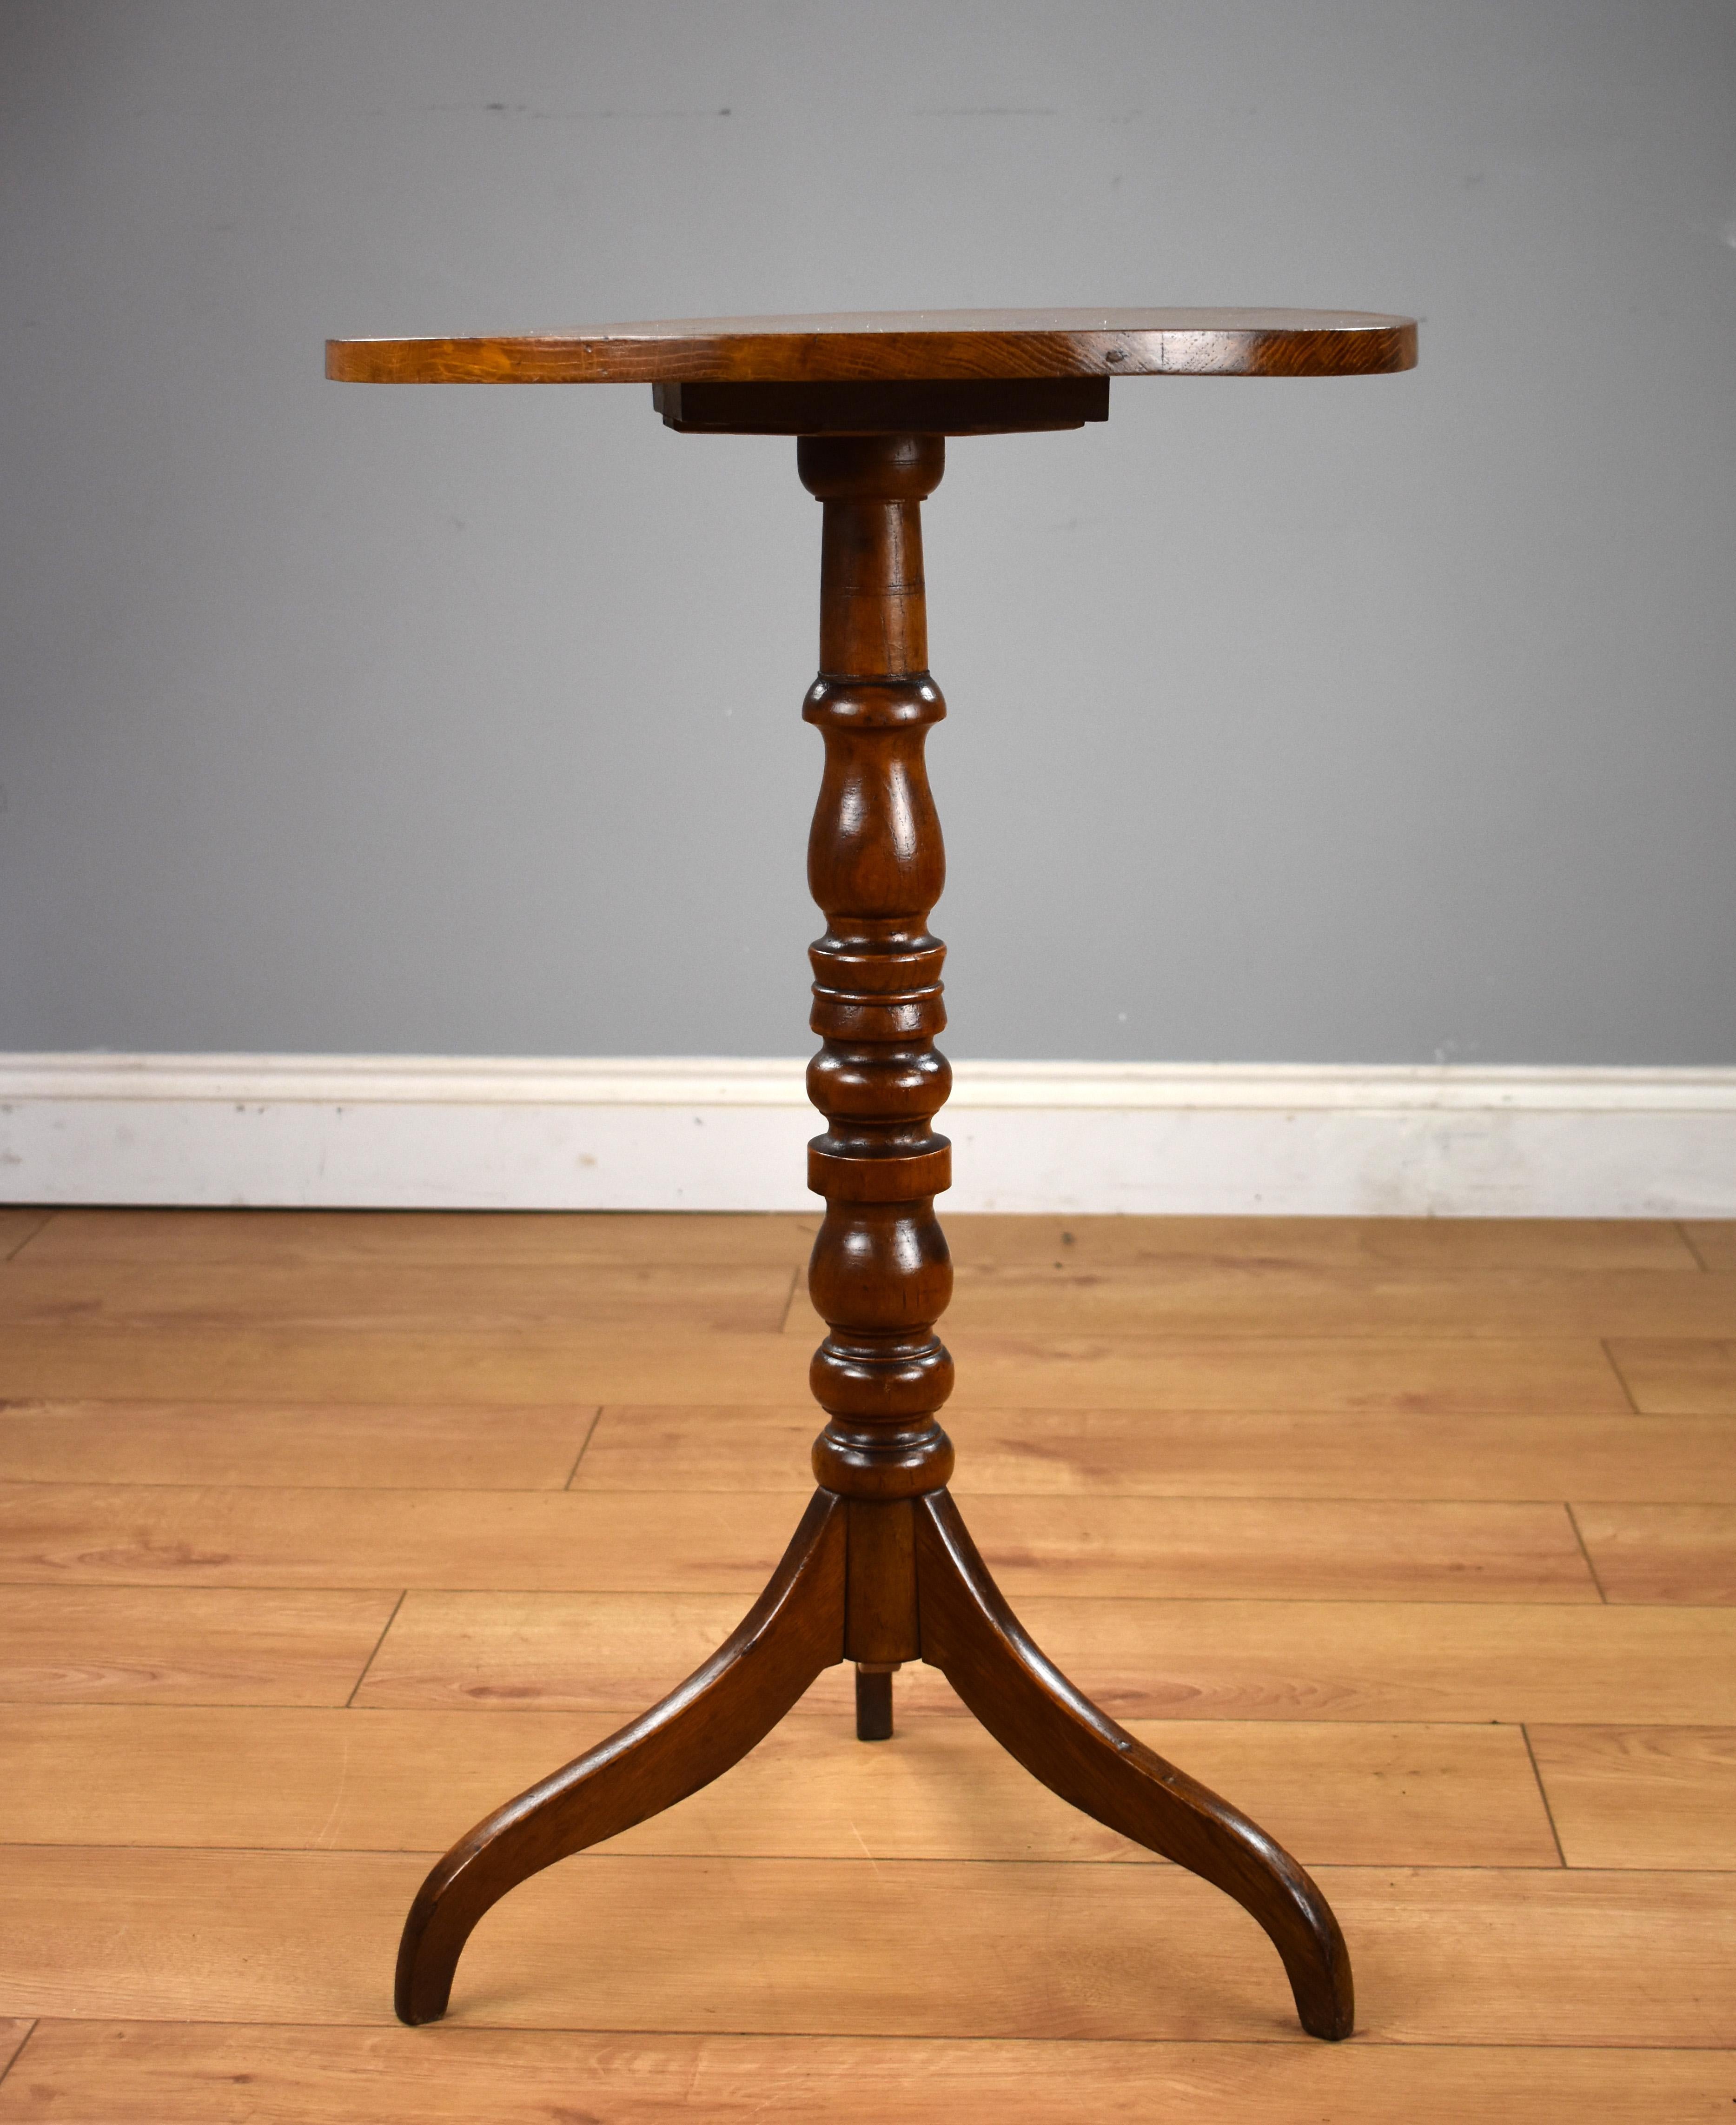 For sale is good quality unusual early Victorian elm occasional table, having a circular top above a well turned base, standing on three elegant legs. The table is in very good, original condition for its age. 

Measures: Width 18